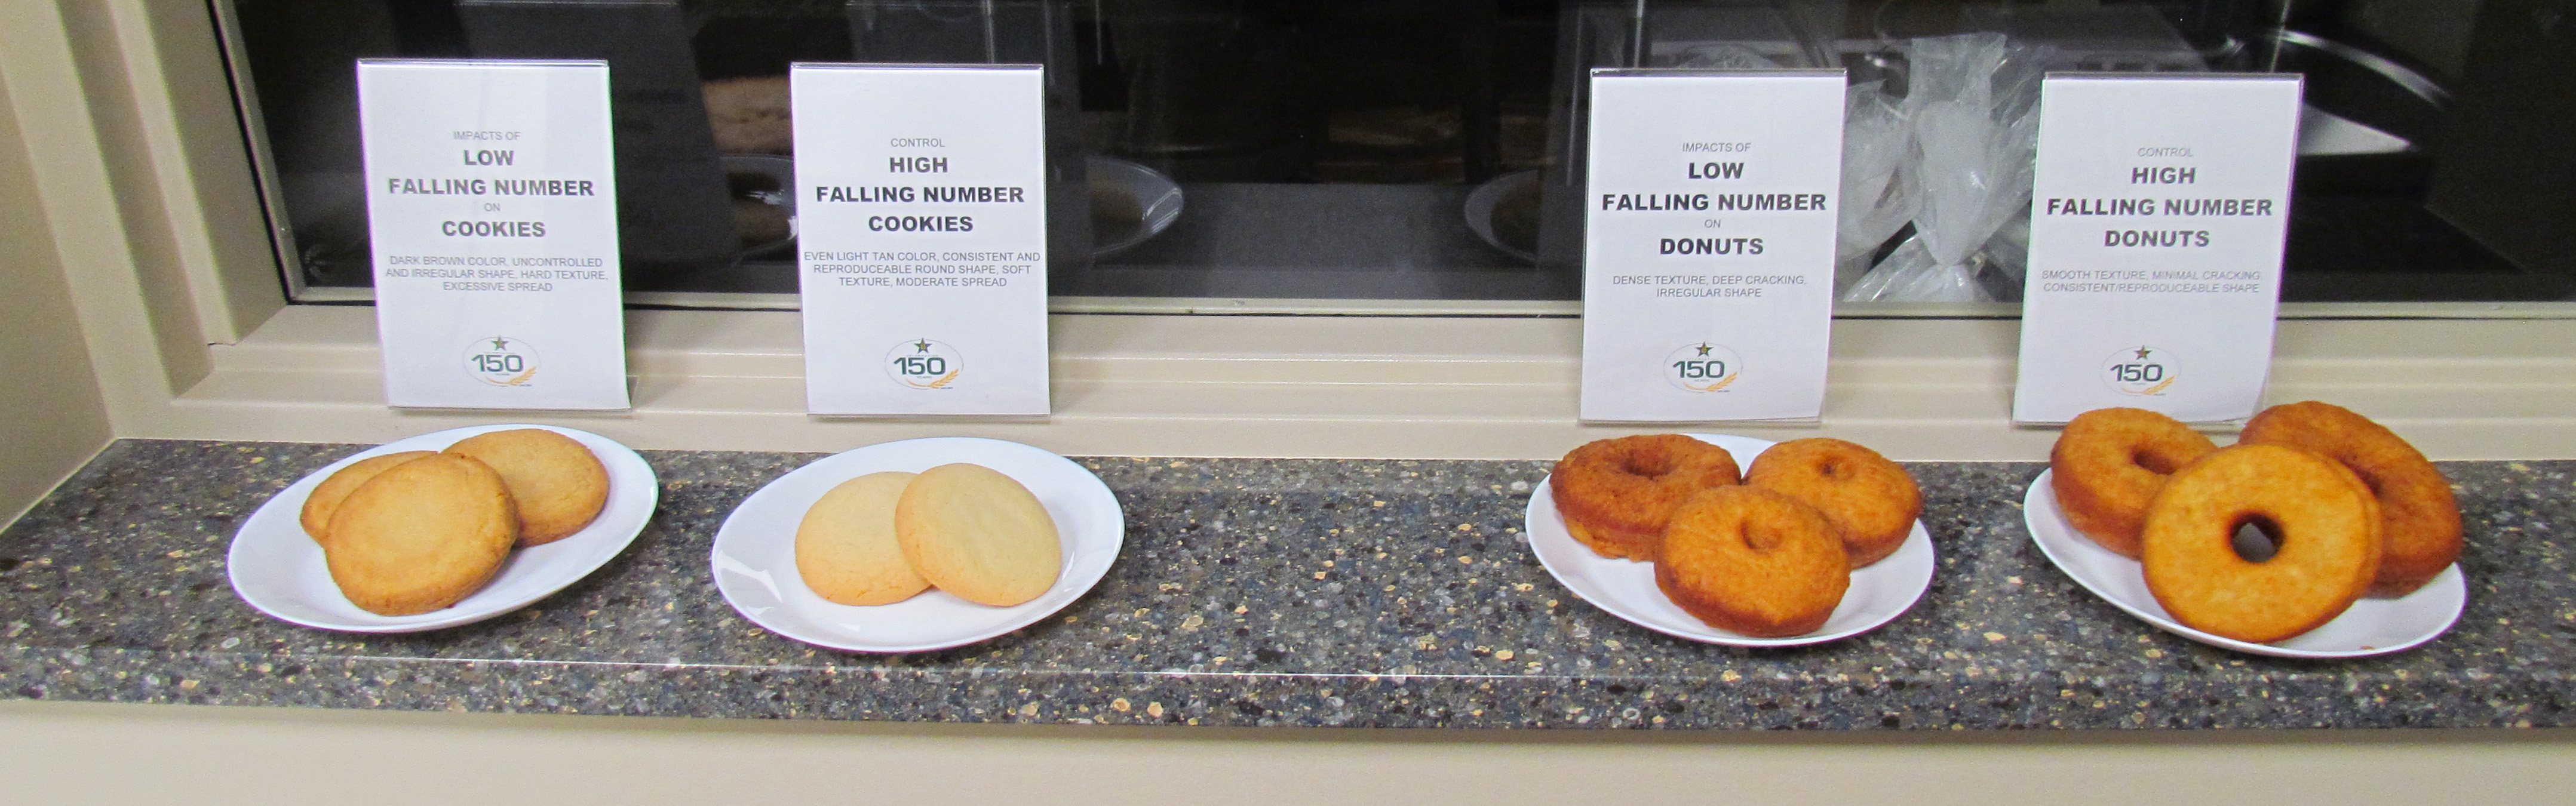 For different cookies and donuts on plates, showing examples of what low and high falling numbers look like when baking a cake.